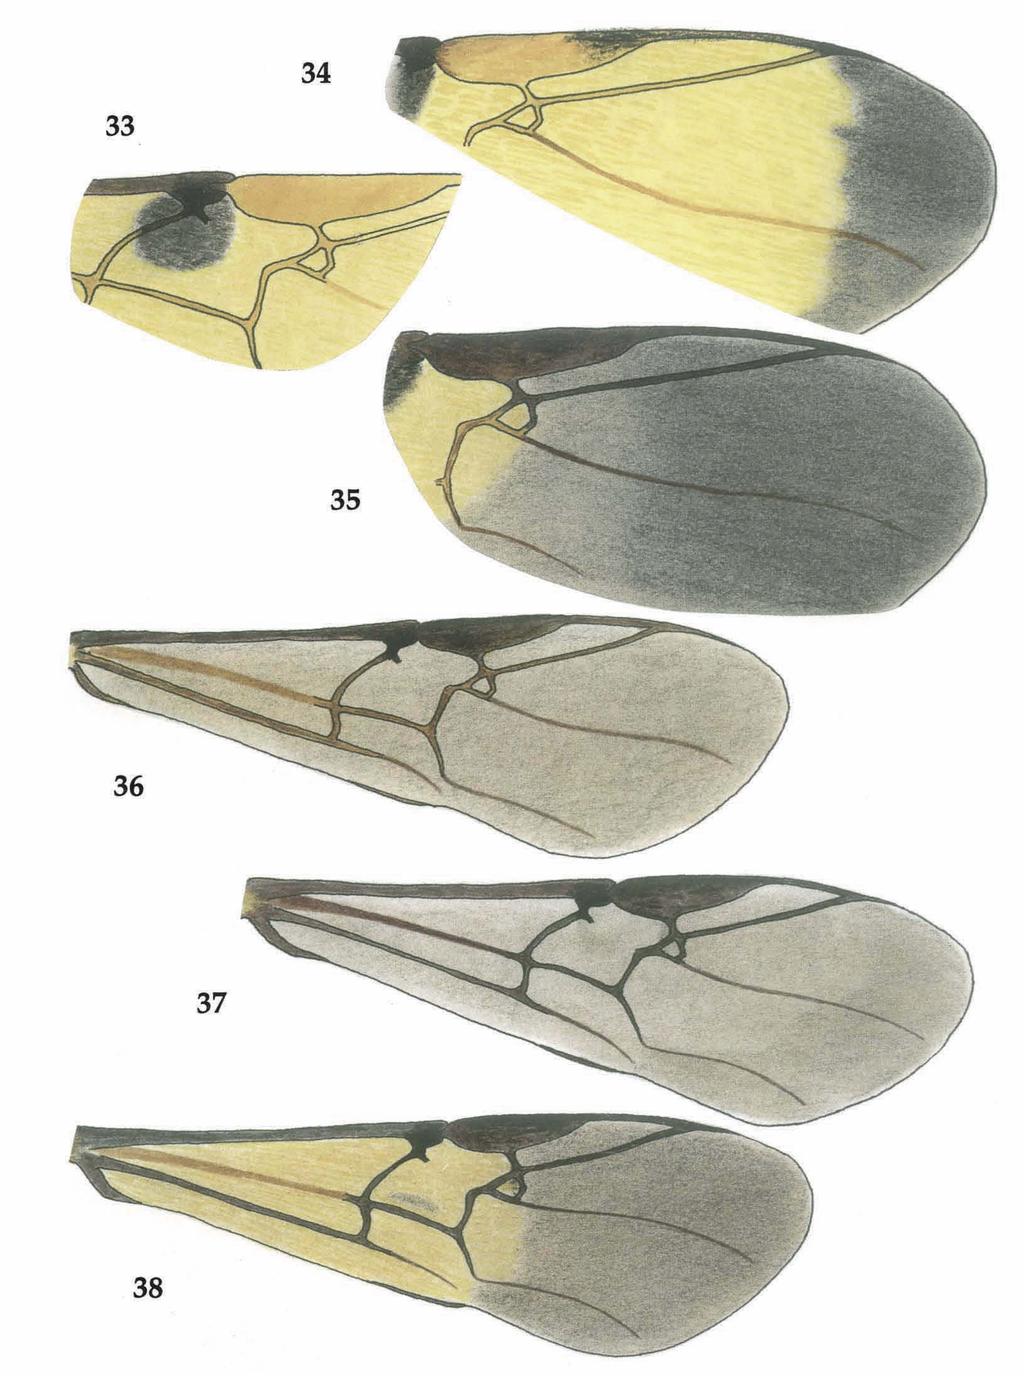 16 Simbolotti & van Achterberg. Euagathis from the Sunda Islands. Zool. Verh. Leiden 293 (1994) Figs 33-38, colour pattern of (parts of) fore wing of Euagathis spp. 33-35, E.